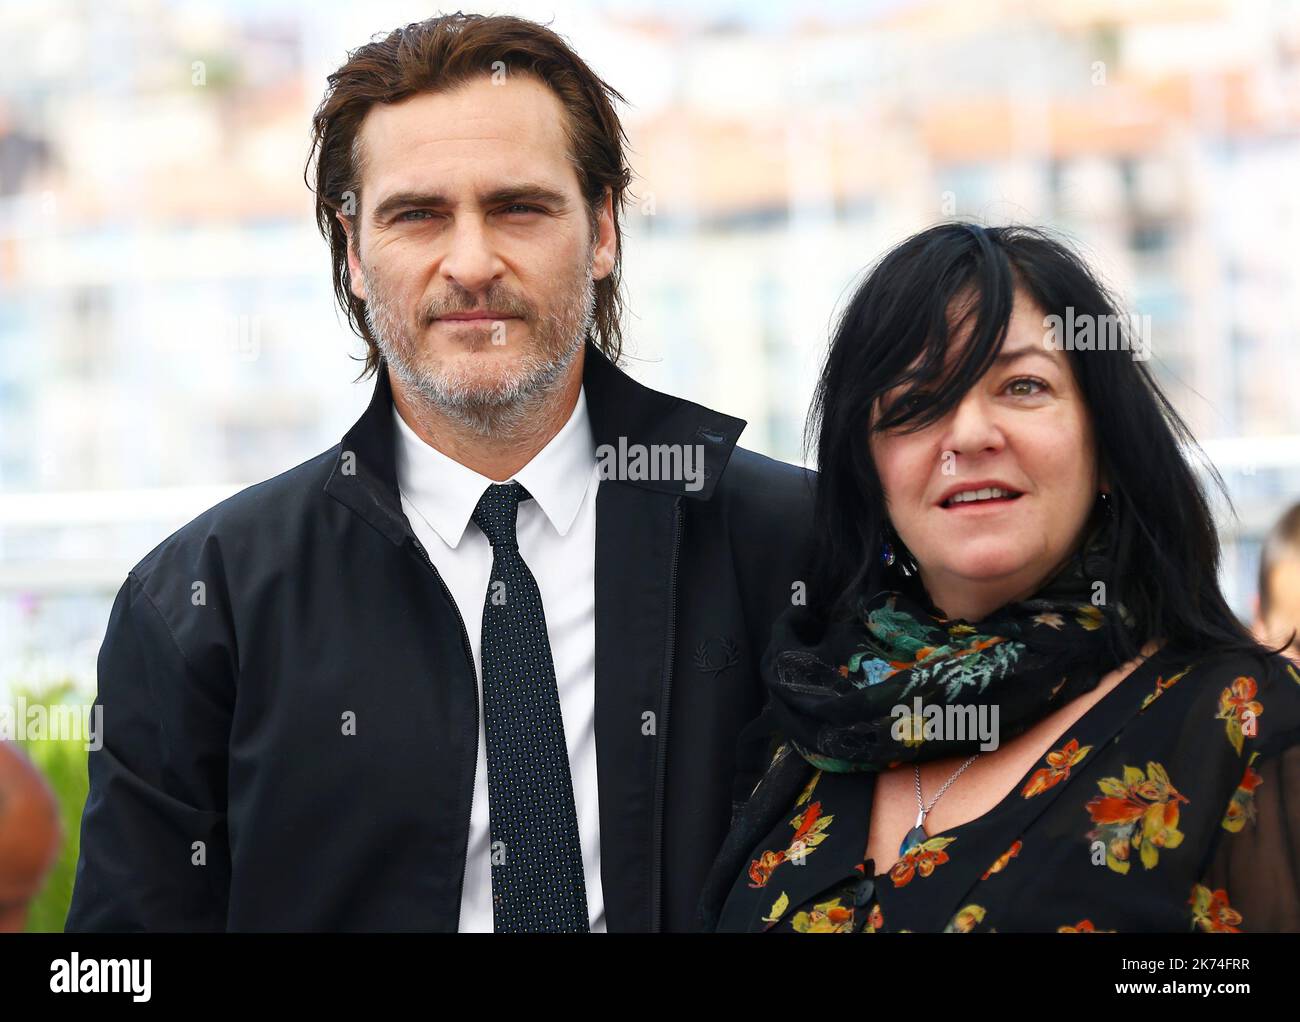 ©PHOTOPQR/NICE MATIN ; US actor Joaquin Phoenix (L) and British director Lynne Ramsay pose on May 27, 2017 during a photocall for the film 'You Were Never Really Here' at the 70th edition of the Cannes Film Festival in Cannes, southern France.   70th annual Cannes Film Festival in Cannes, France, May 2017. The film festival will run from 17 to 28 May. Stock Photo